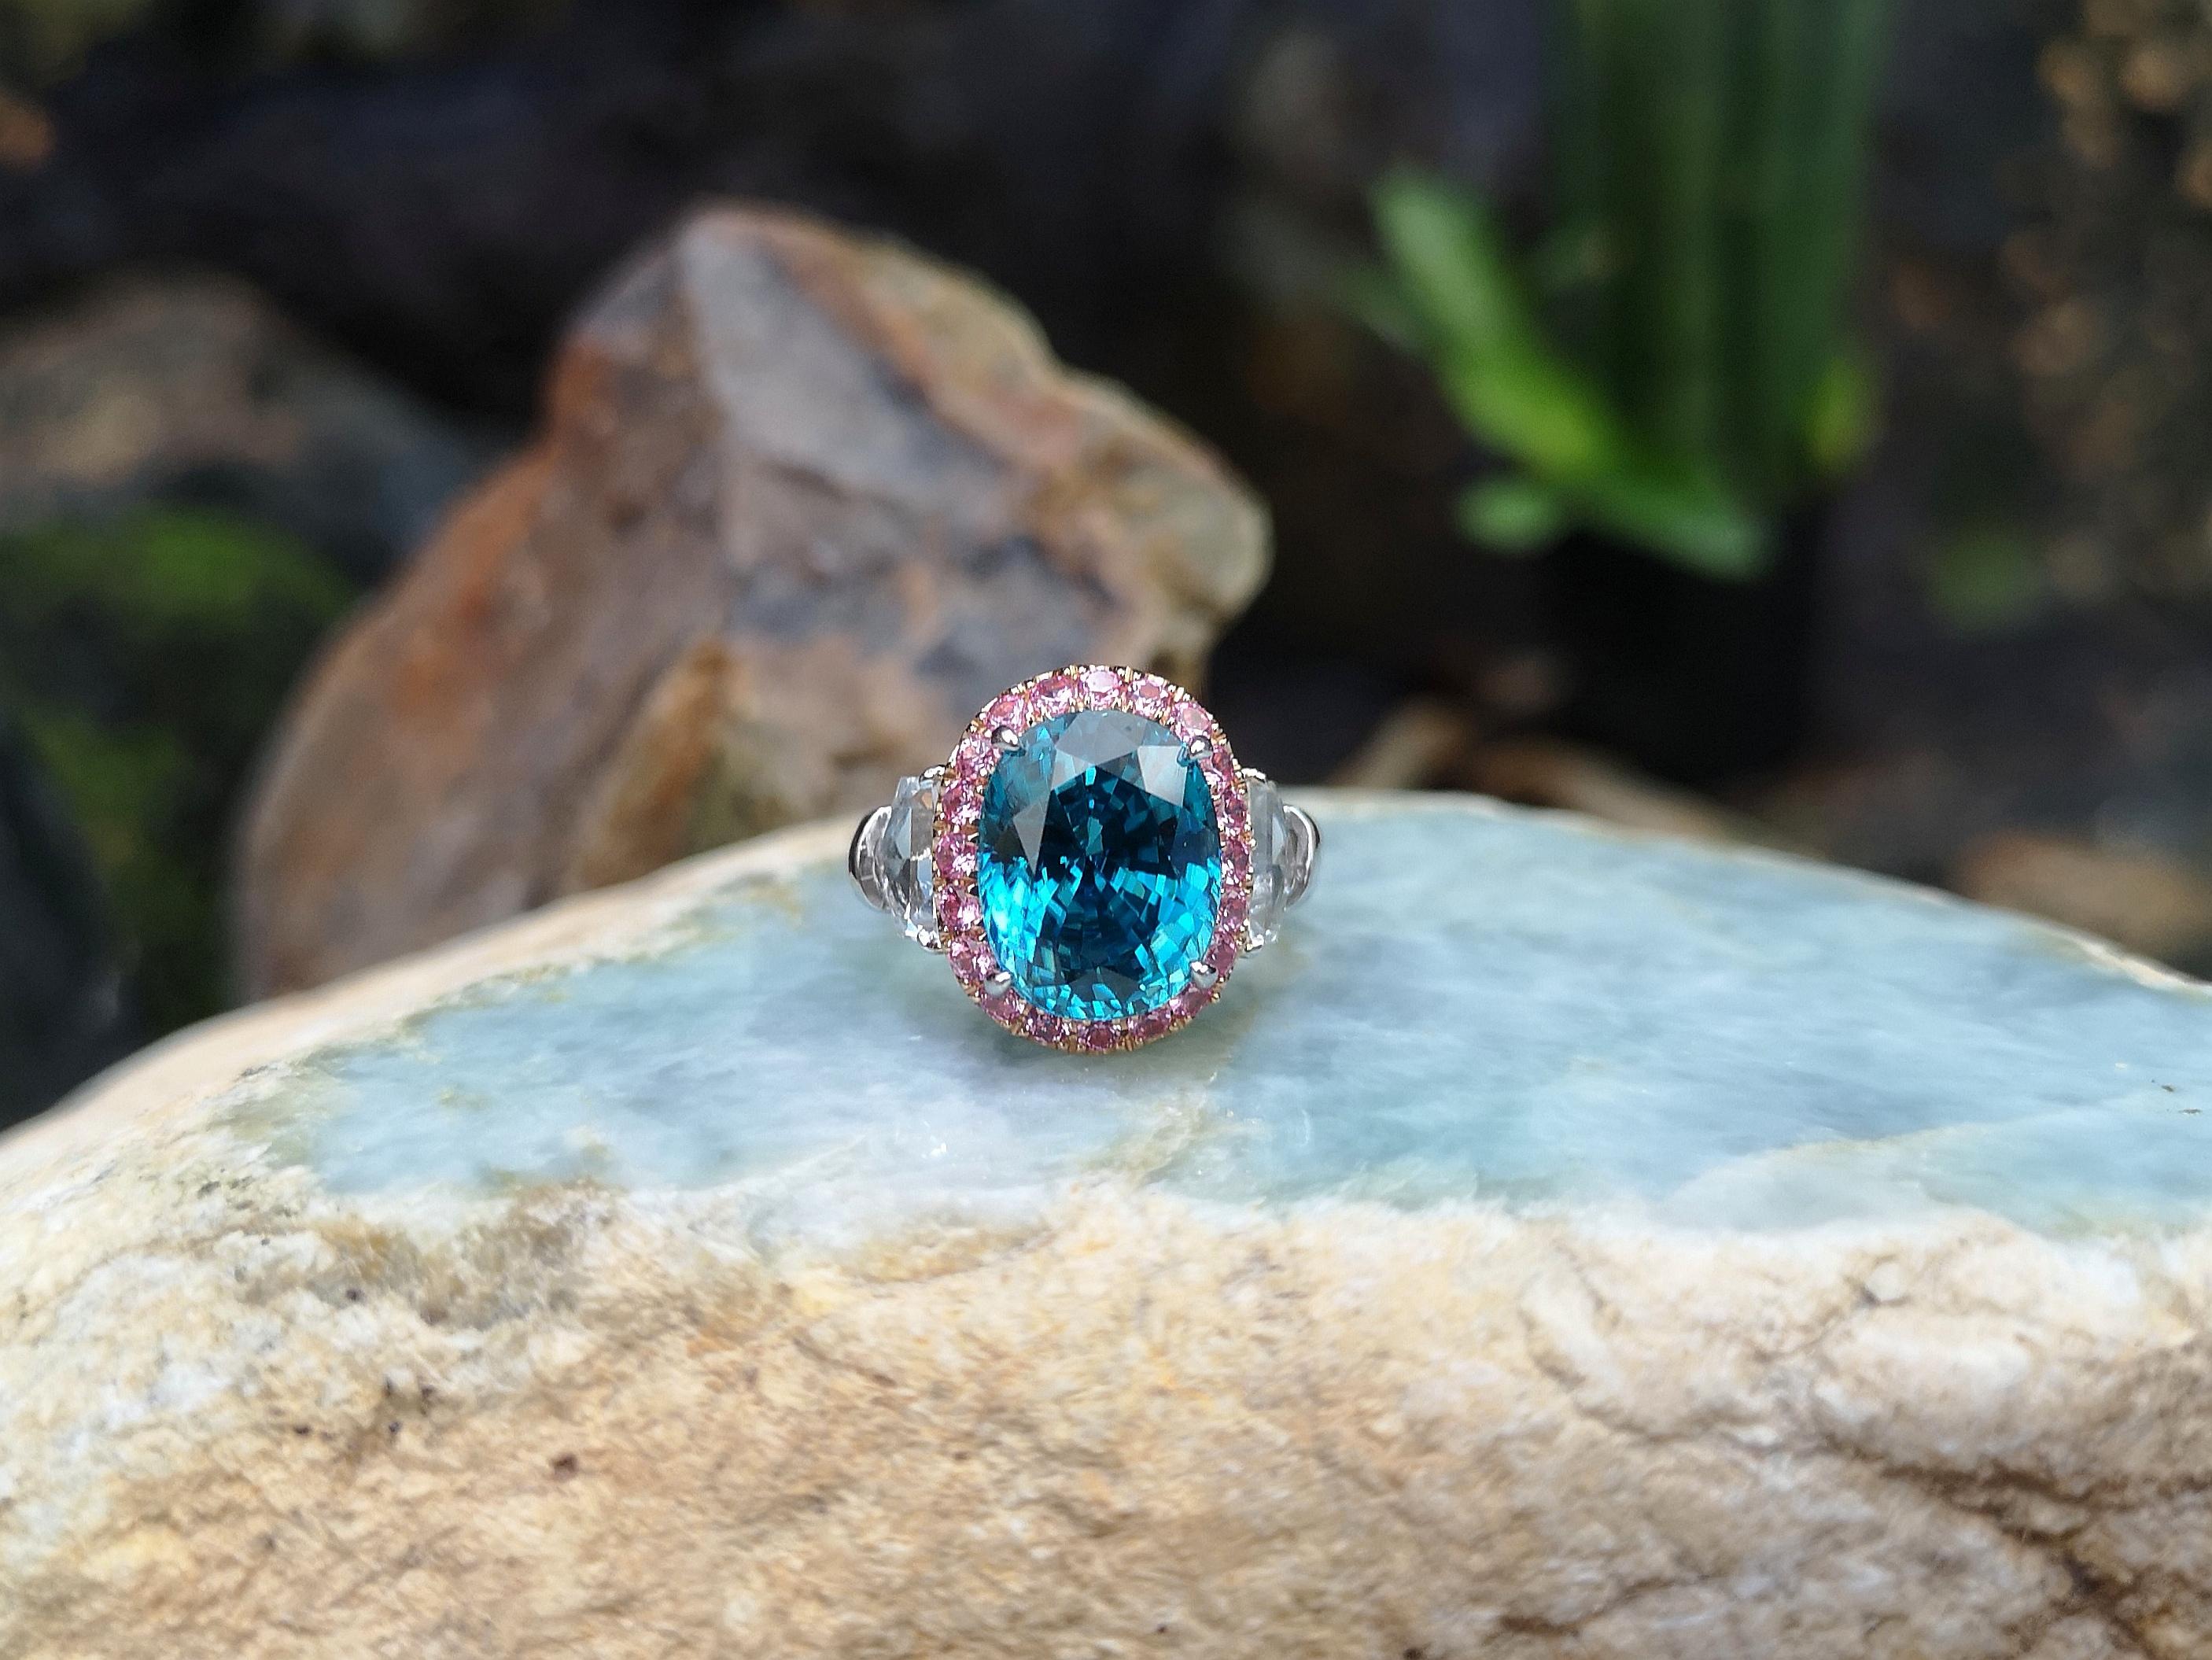 Blue Zircon with Pink Sapphire, White Sapphire Ring set in 18 Karat White Gold For Sale 1